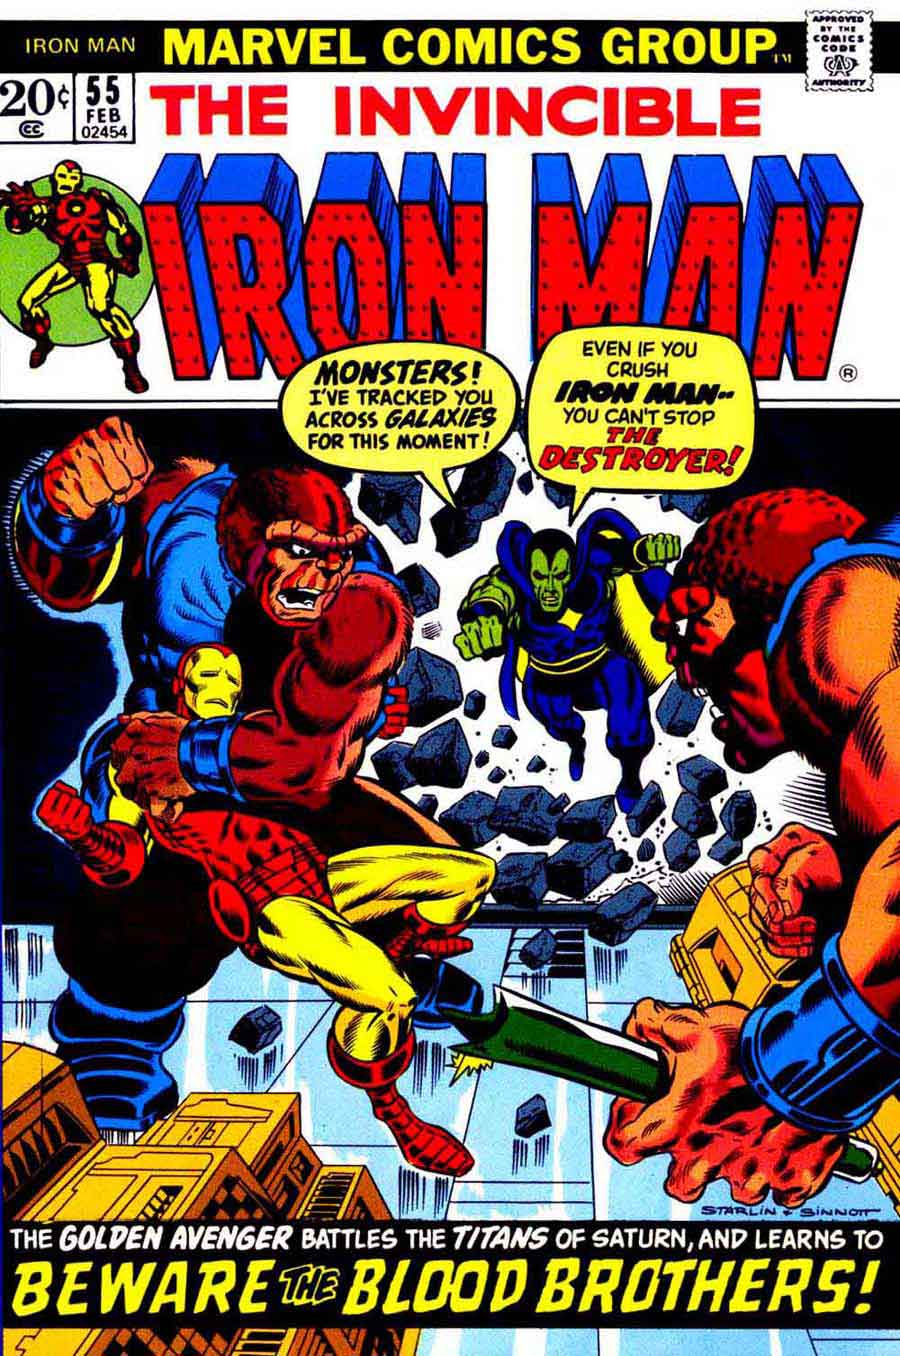 Iron Man #55 bronze age 1970s marvel comic book cover art by Jim Starlin